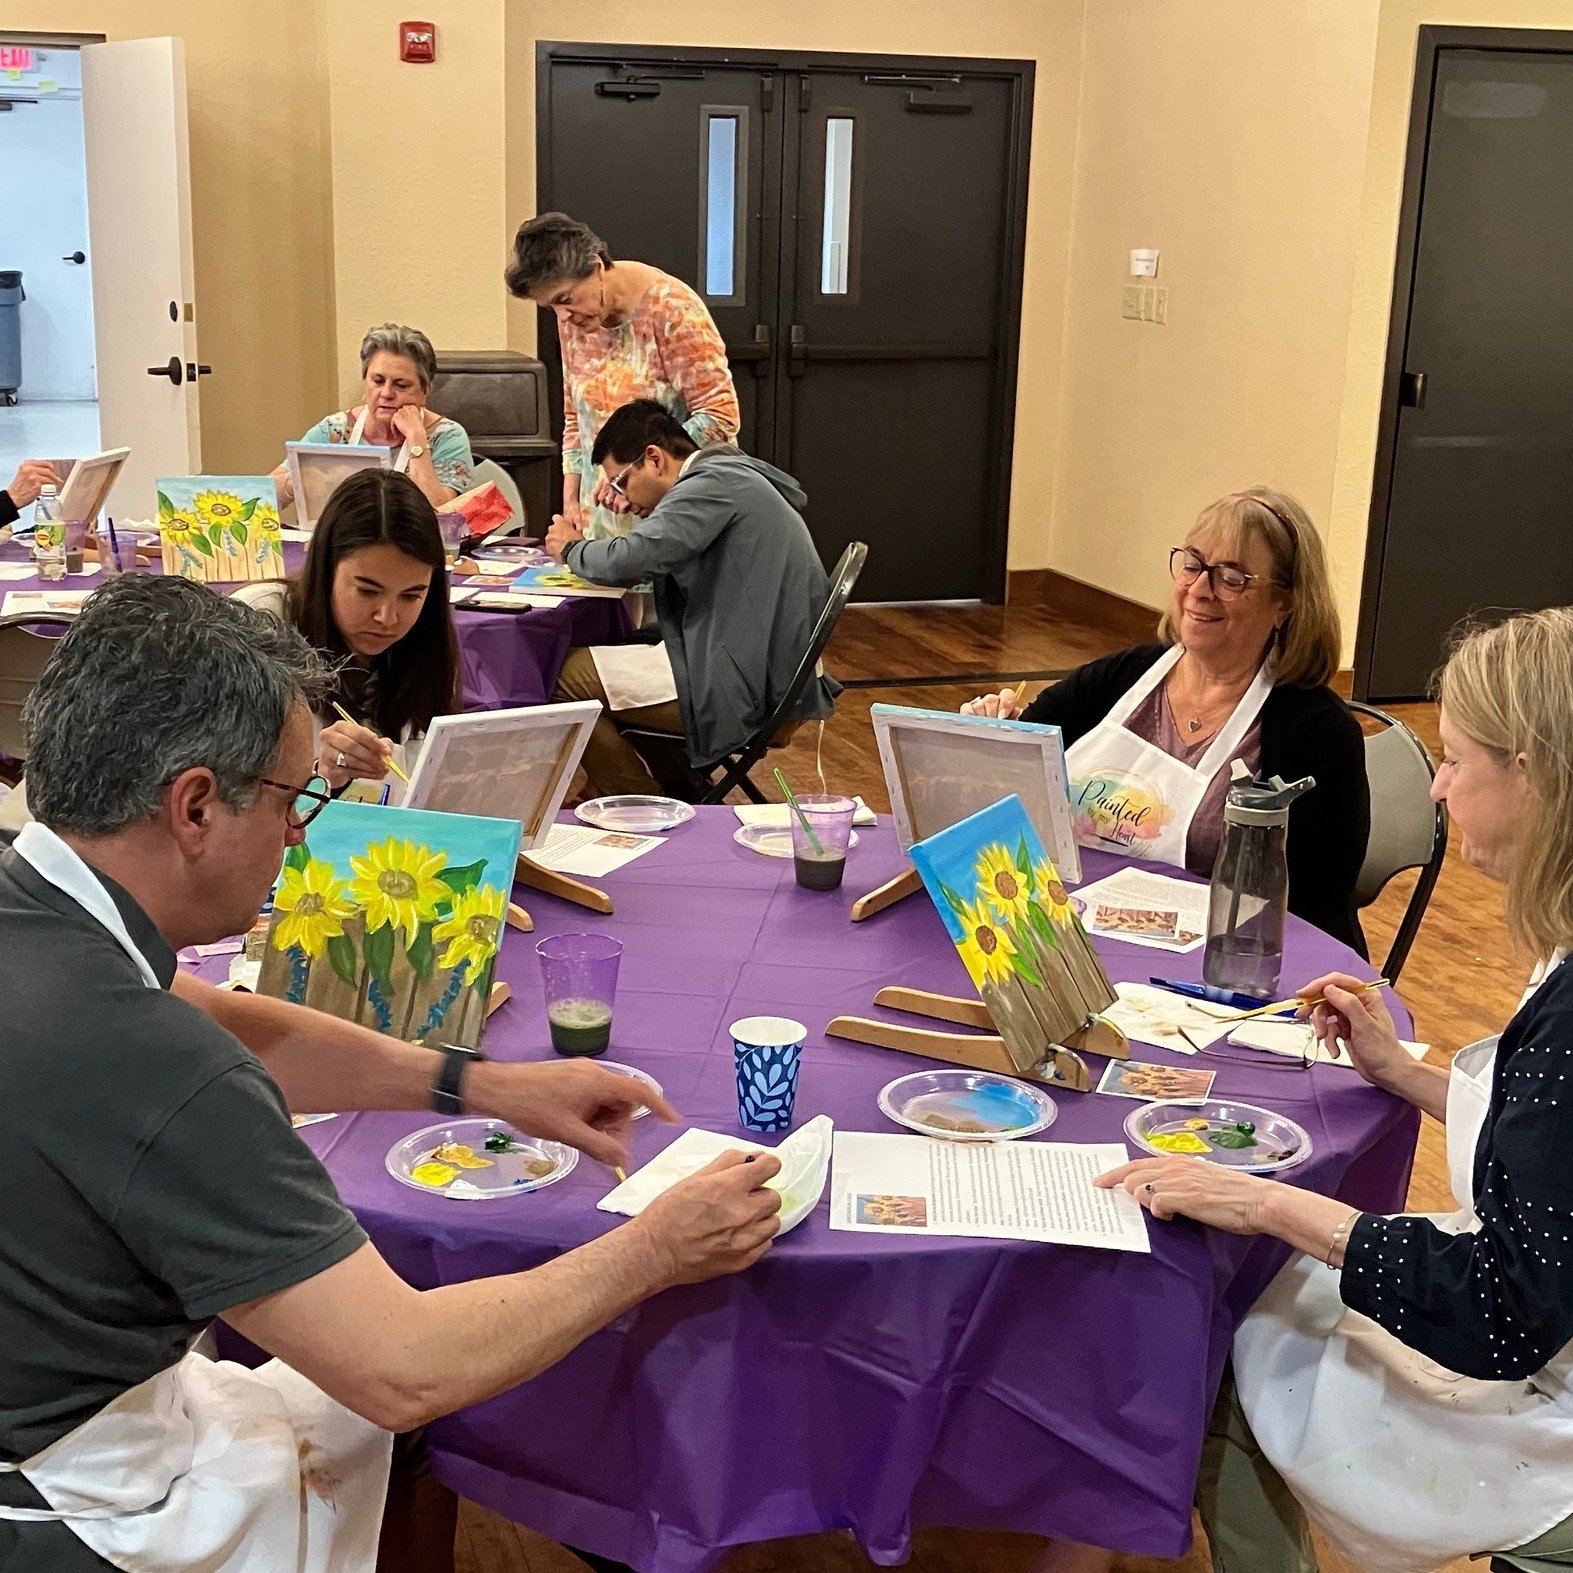 The WHPC staff participated in a fun and relaxing painting workshop led by Lorraine Harbour.  The subject matter was sunflowers growing on a fence.  Each painting was a masterpiece and evidence there are some budding artists amongst us!